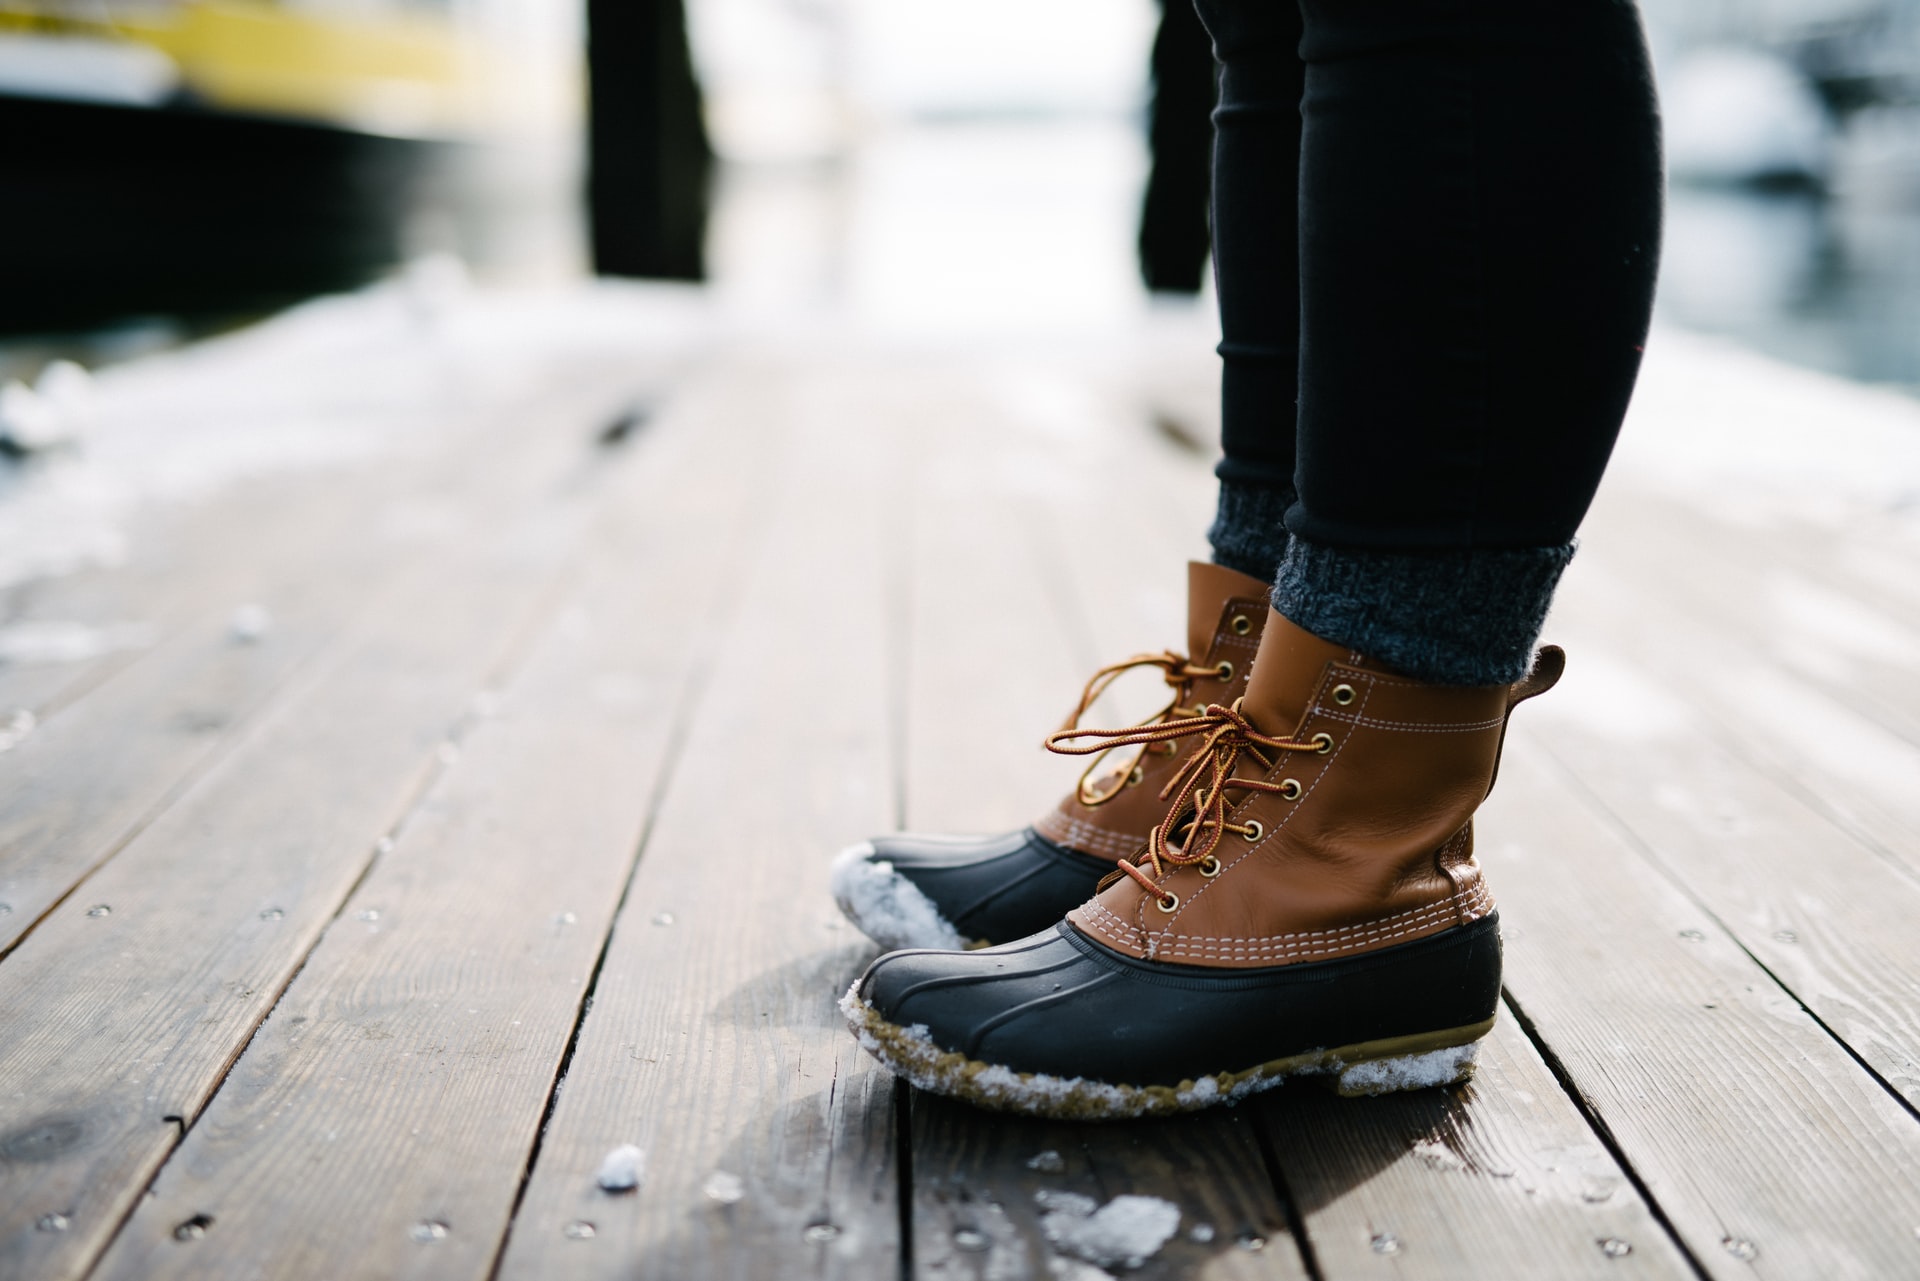 Sorel vs. LL Bean: Which Boots Are for You?